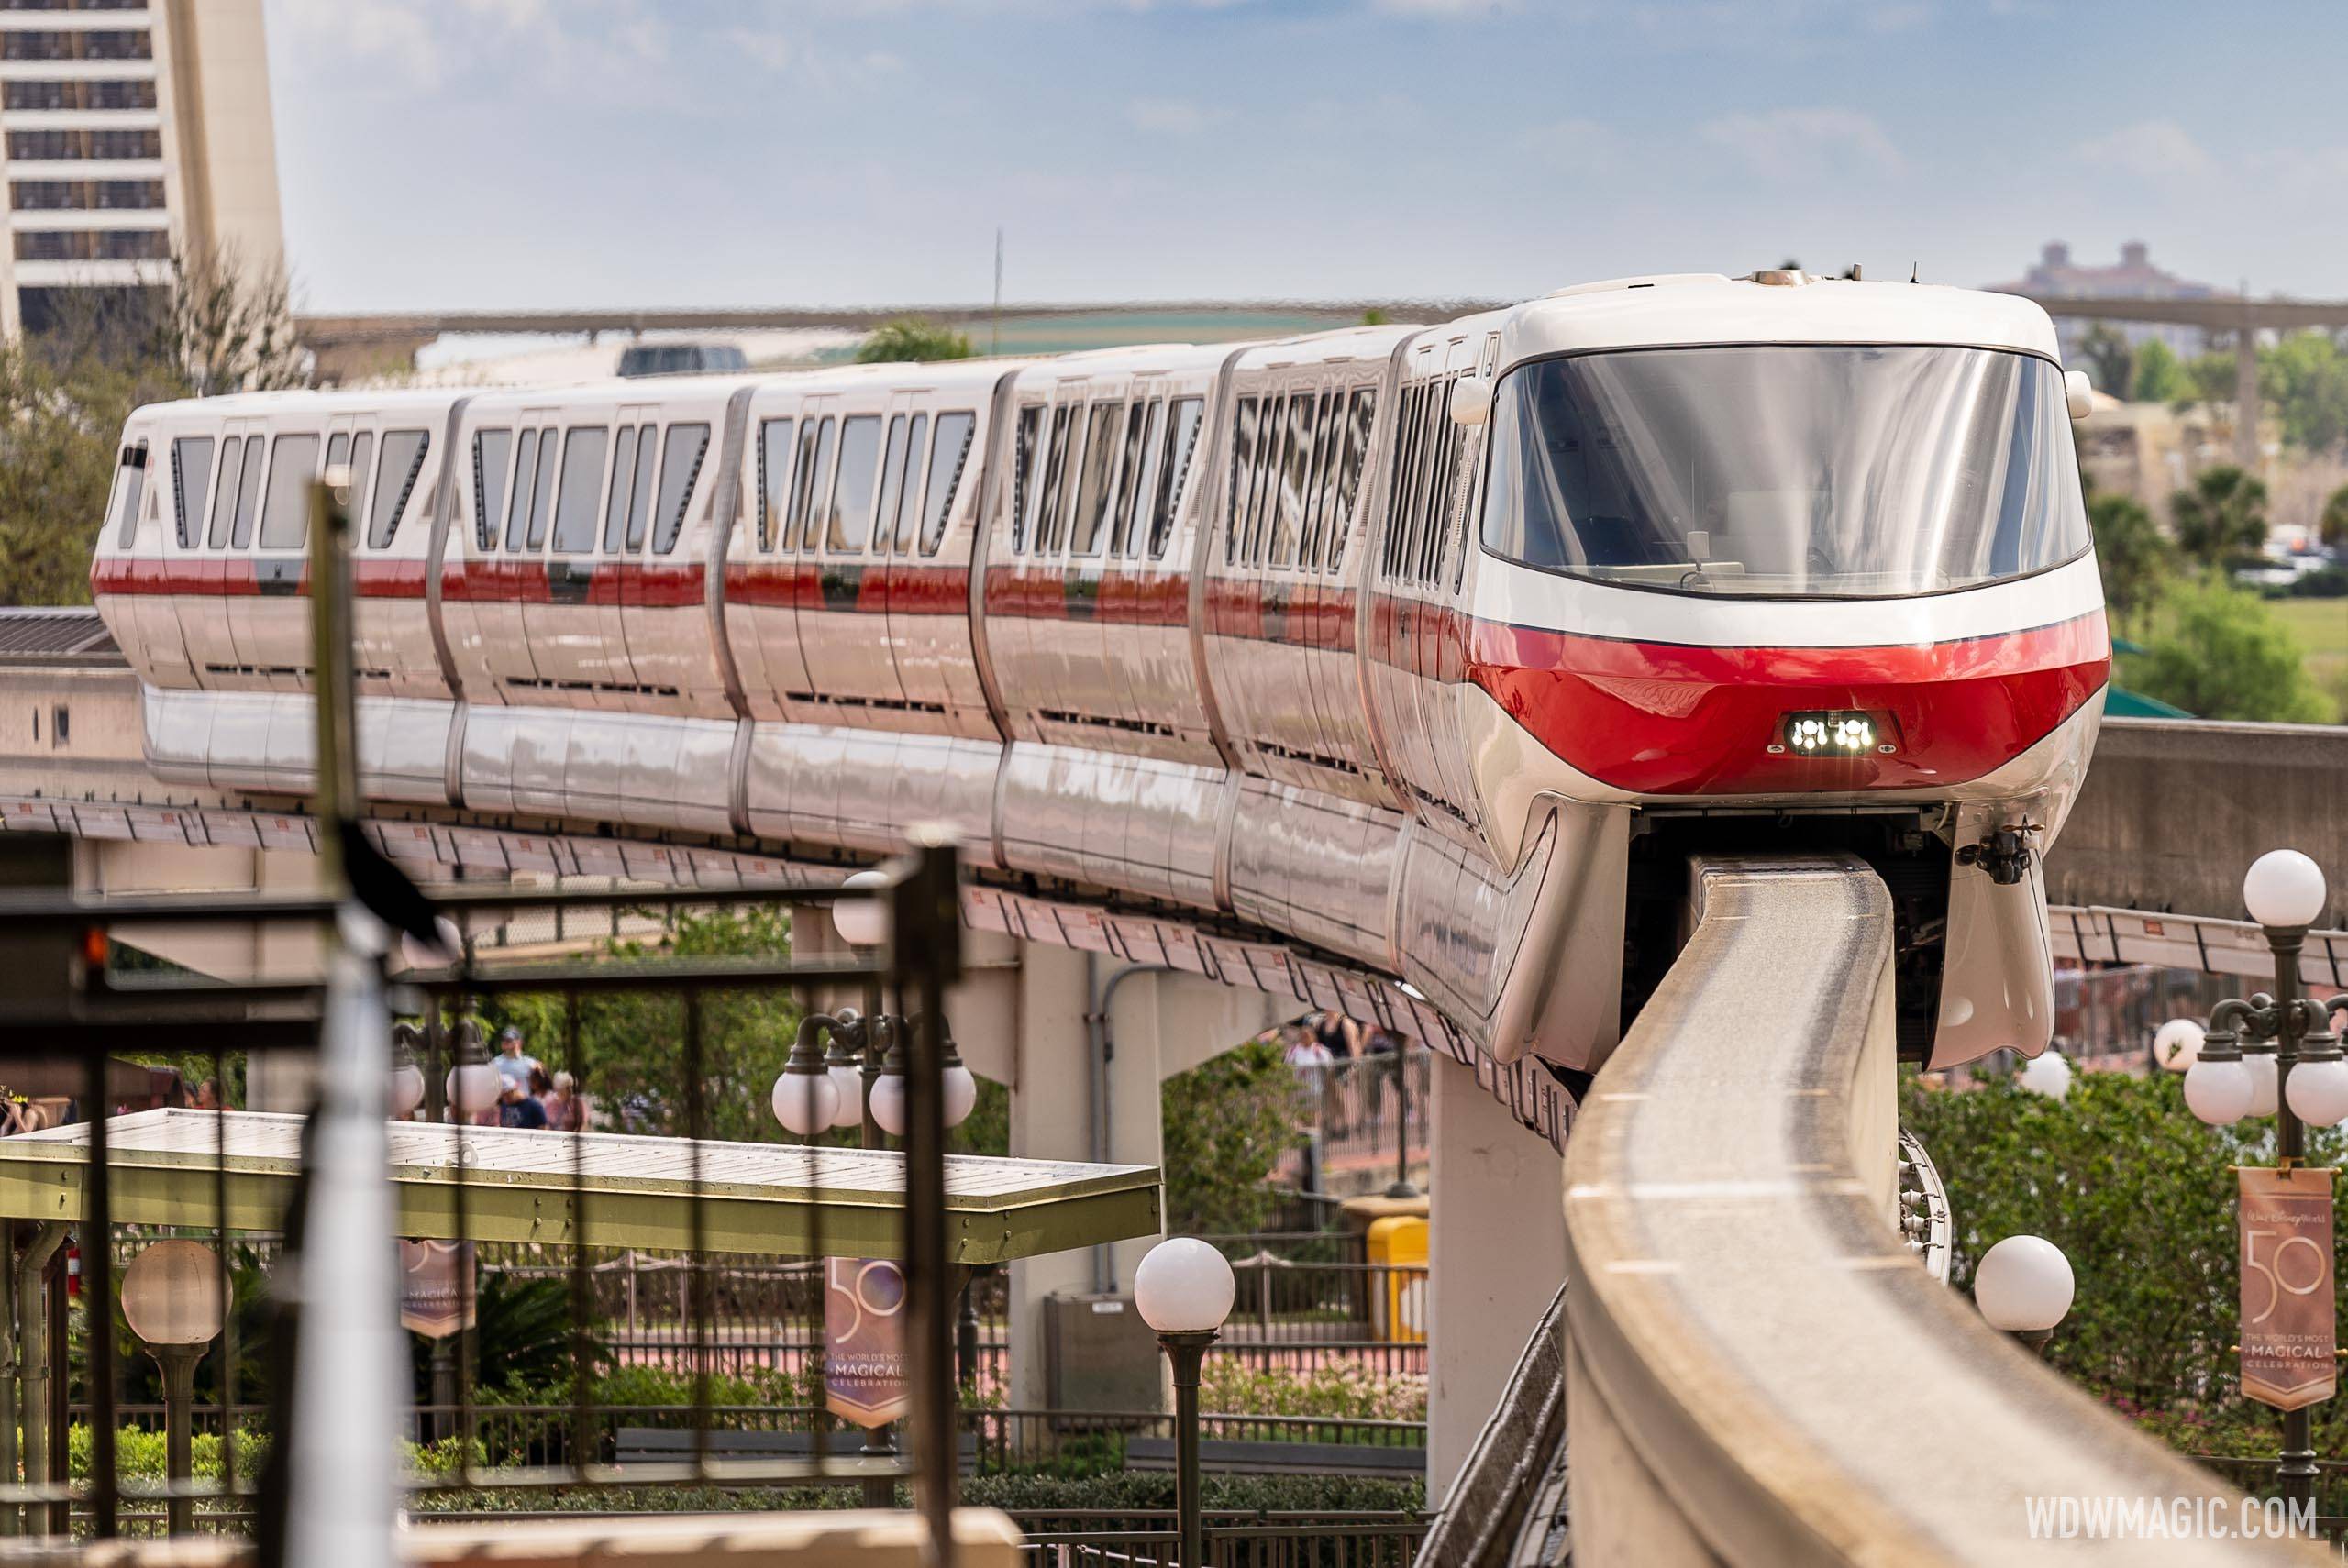 Walt Disney World Monorail beginning service in the early hours during the upcoming Walt Disney World Marathon Weekend